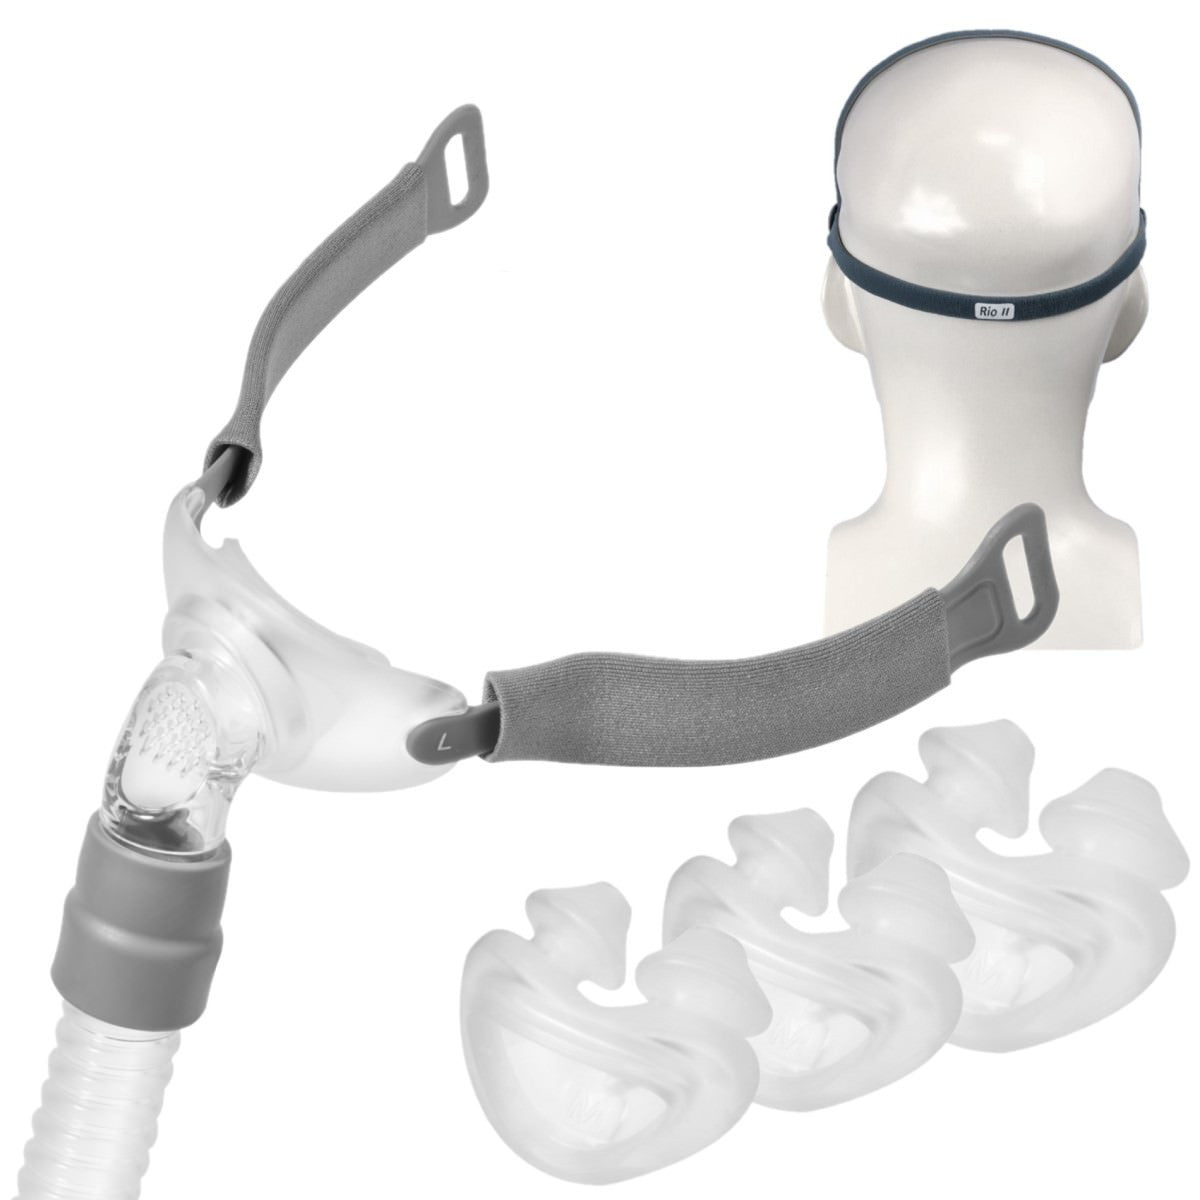 Parts of Rio 2 Nasal CPAP Mask Fit Pack with three pillow silicone cushion sizes.